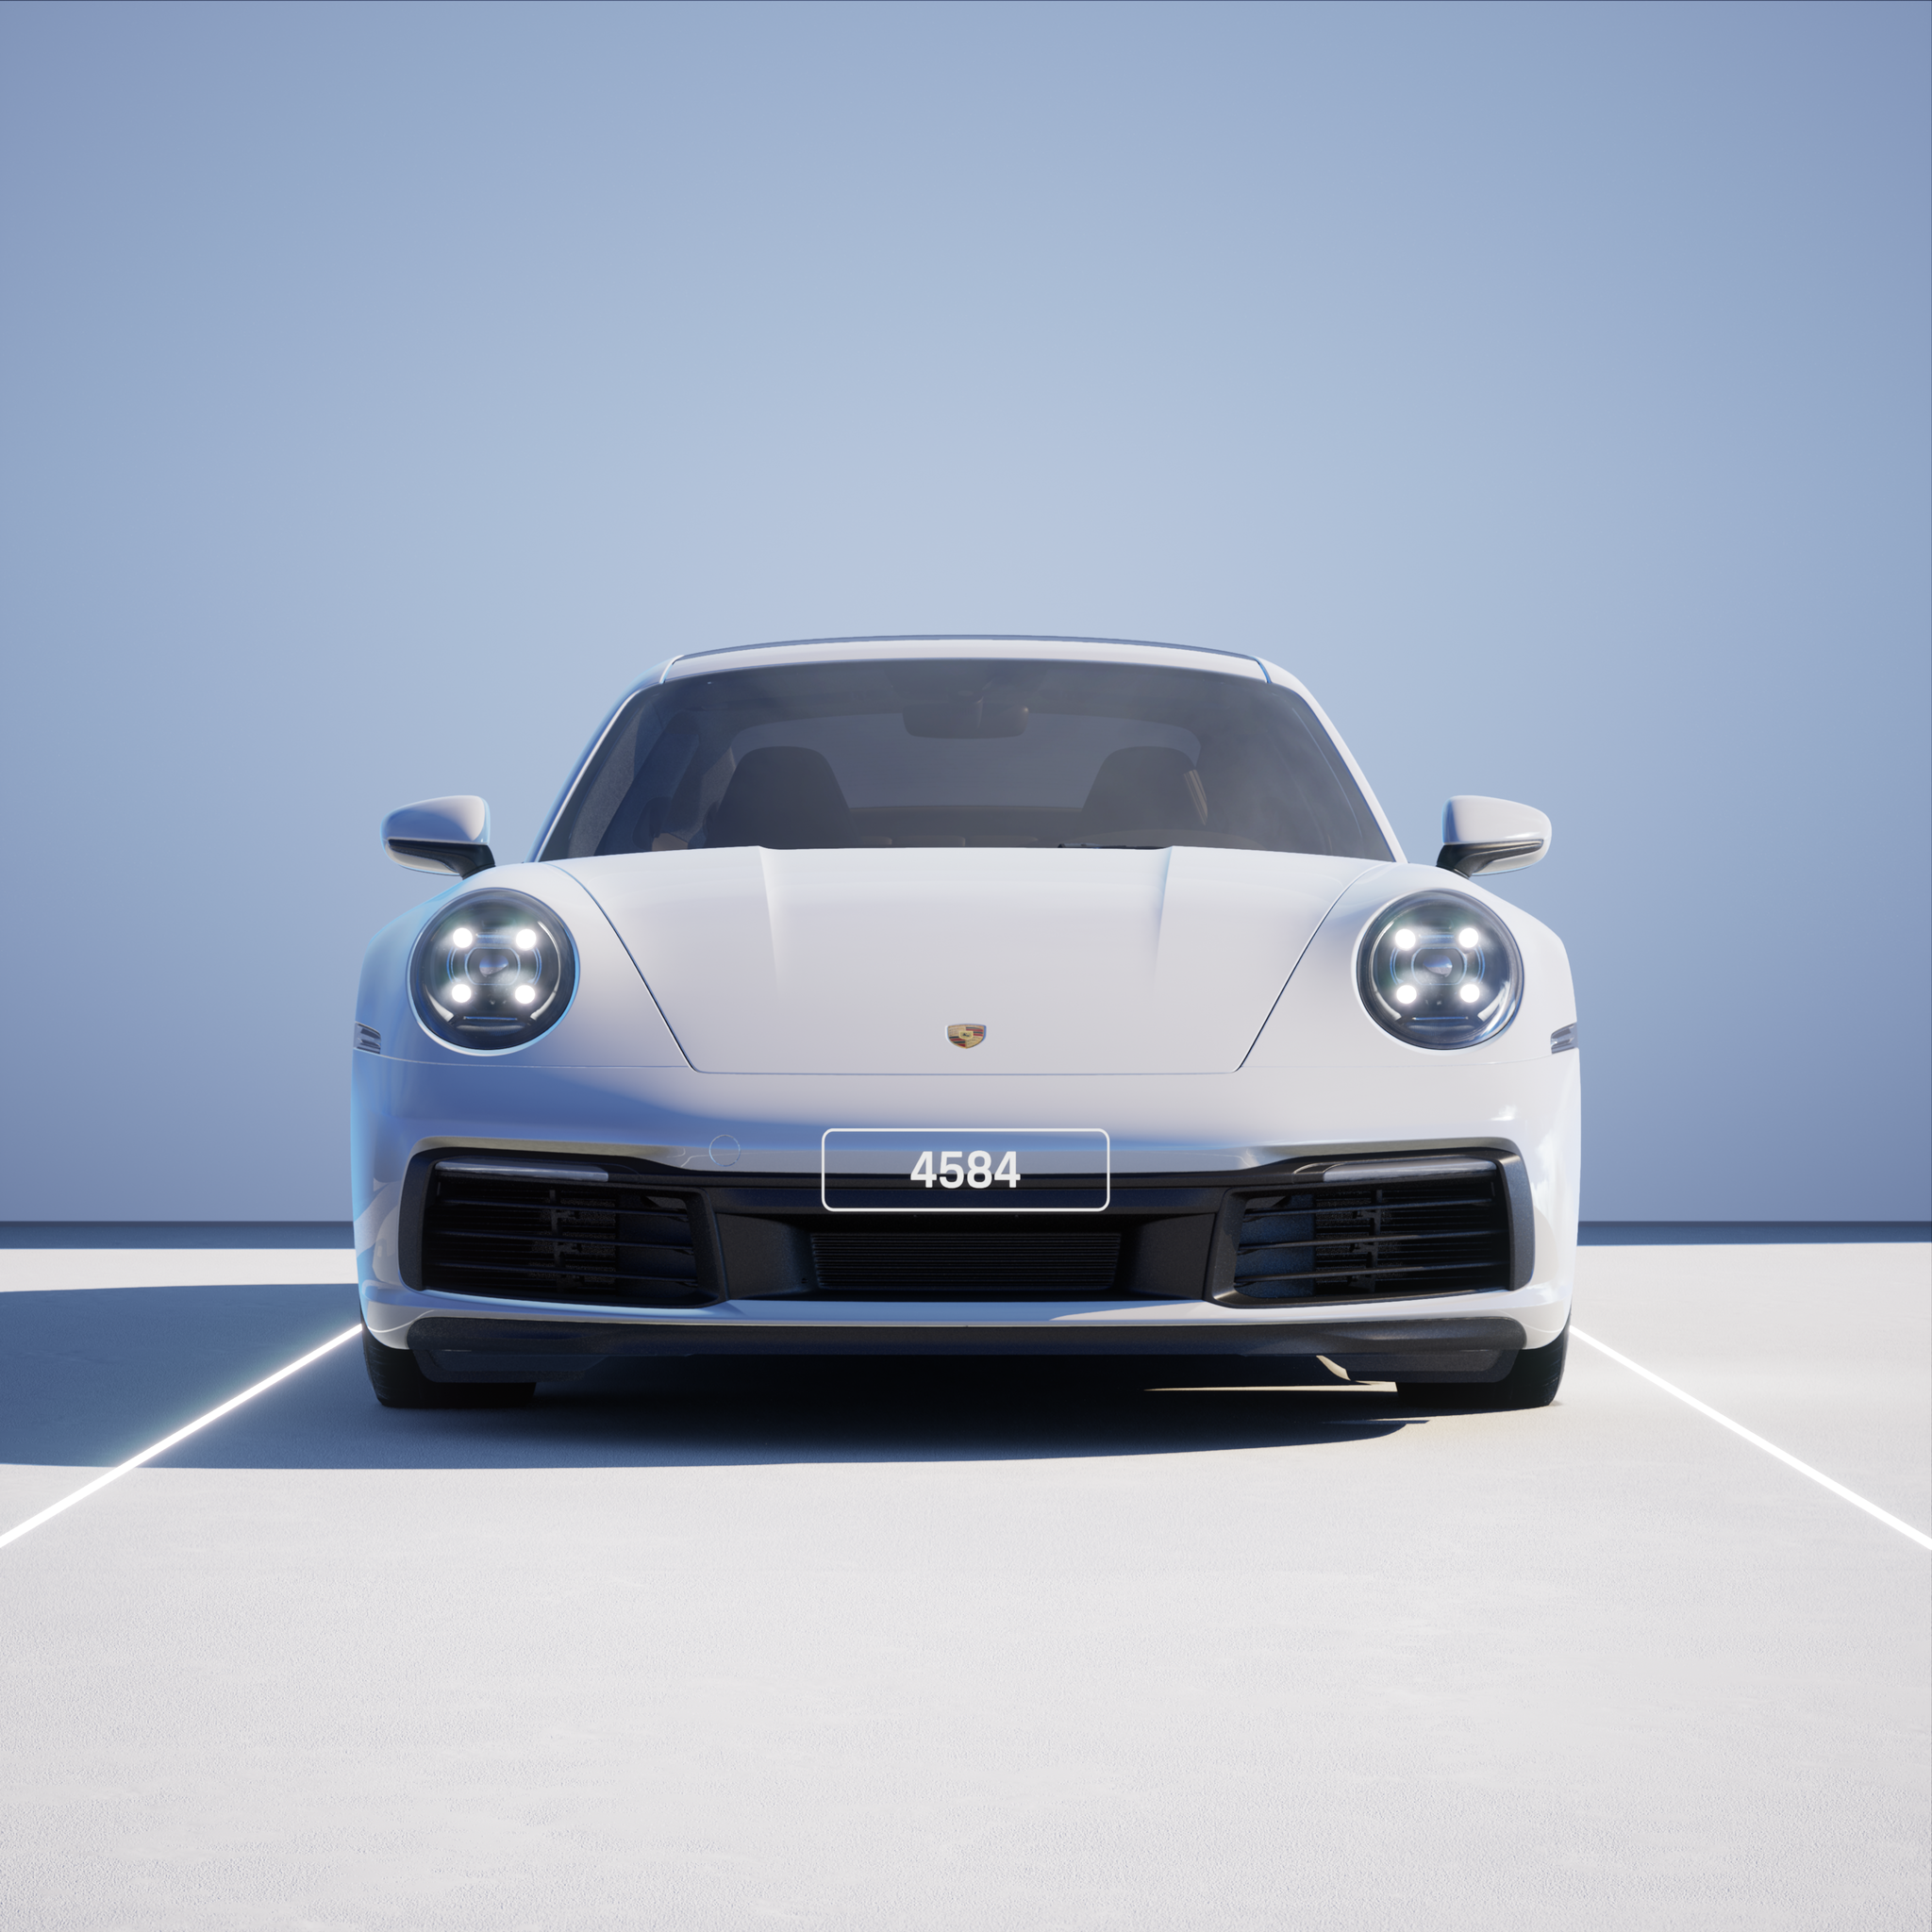 The PORSCHΞ 911 4584 image in phase